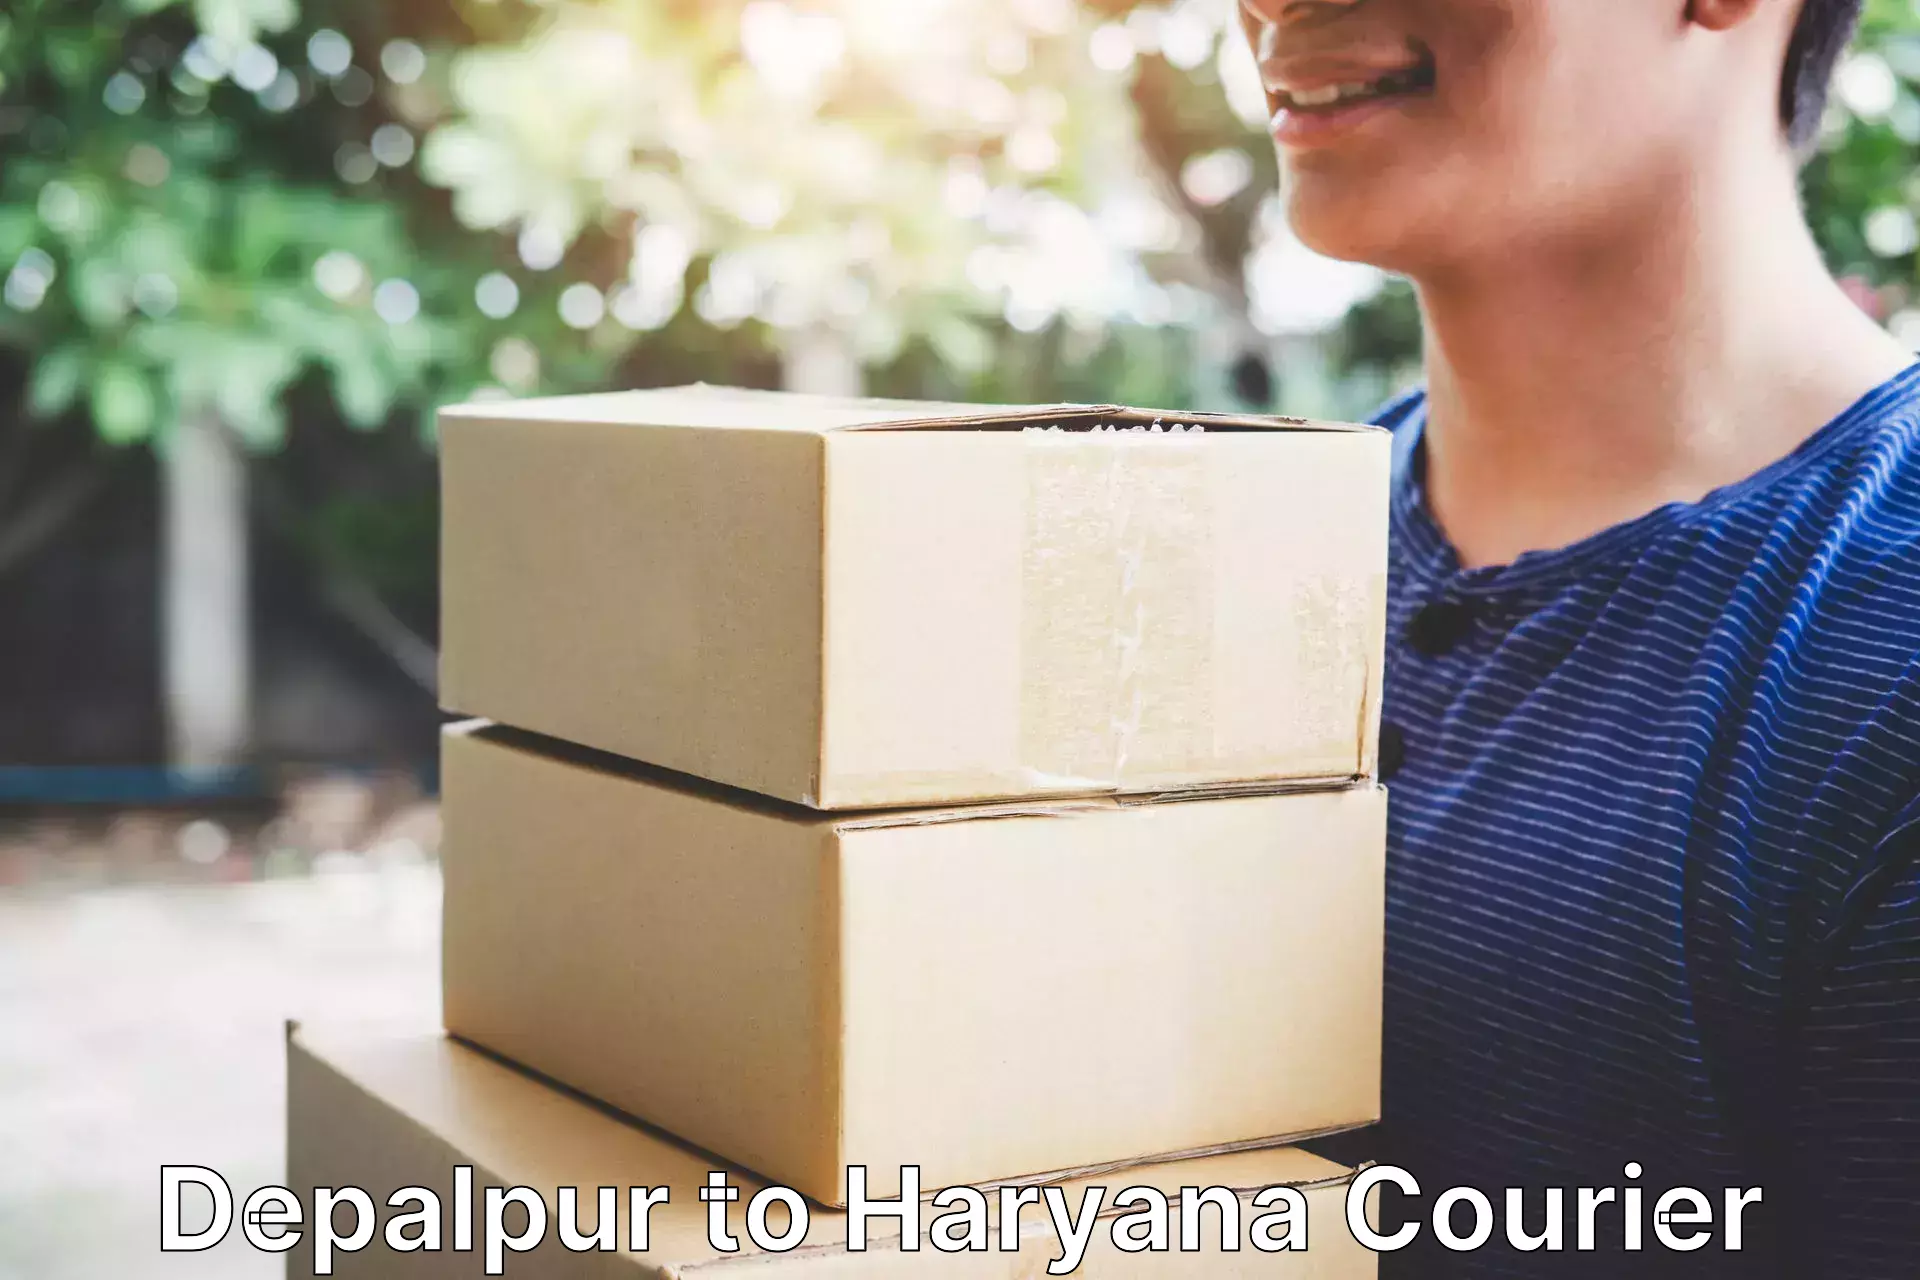 Global courier networks Depalpur to Haryana